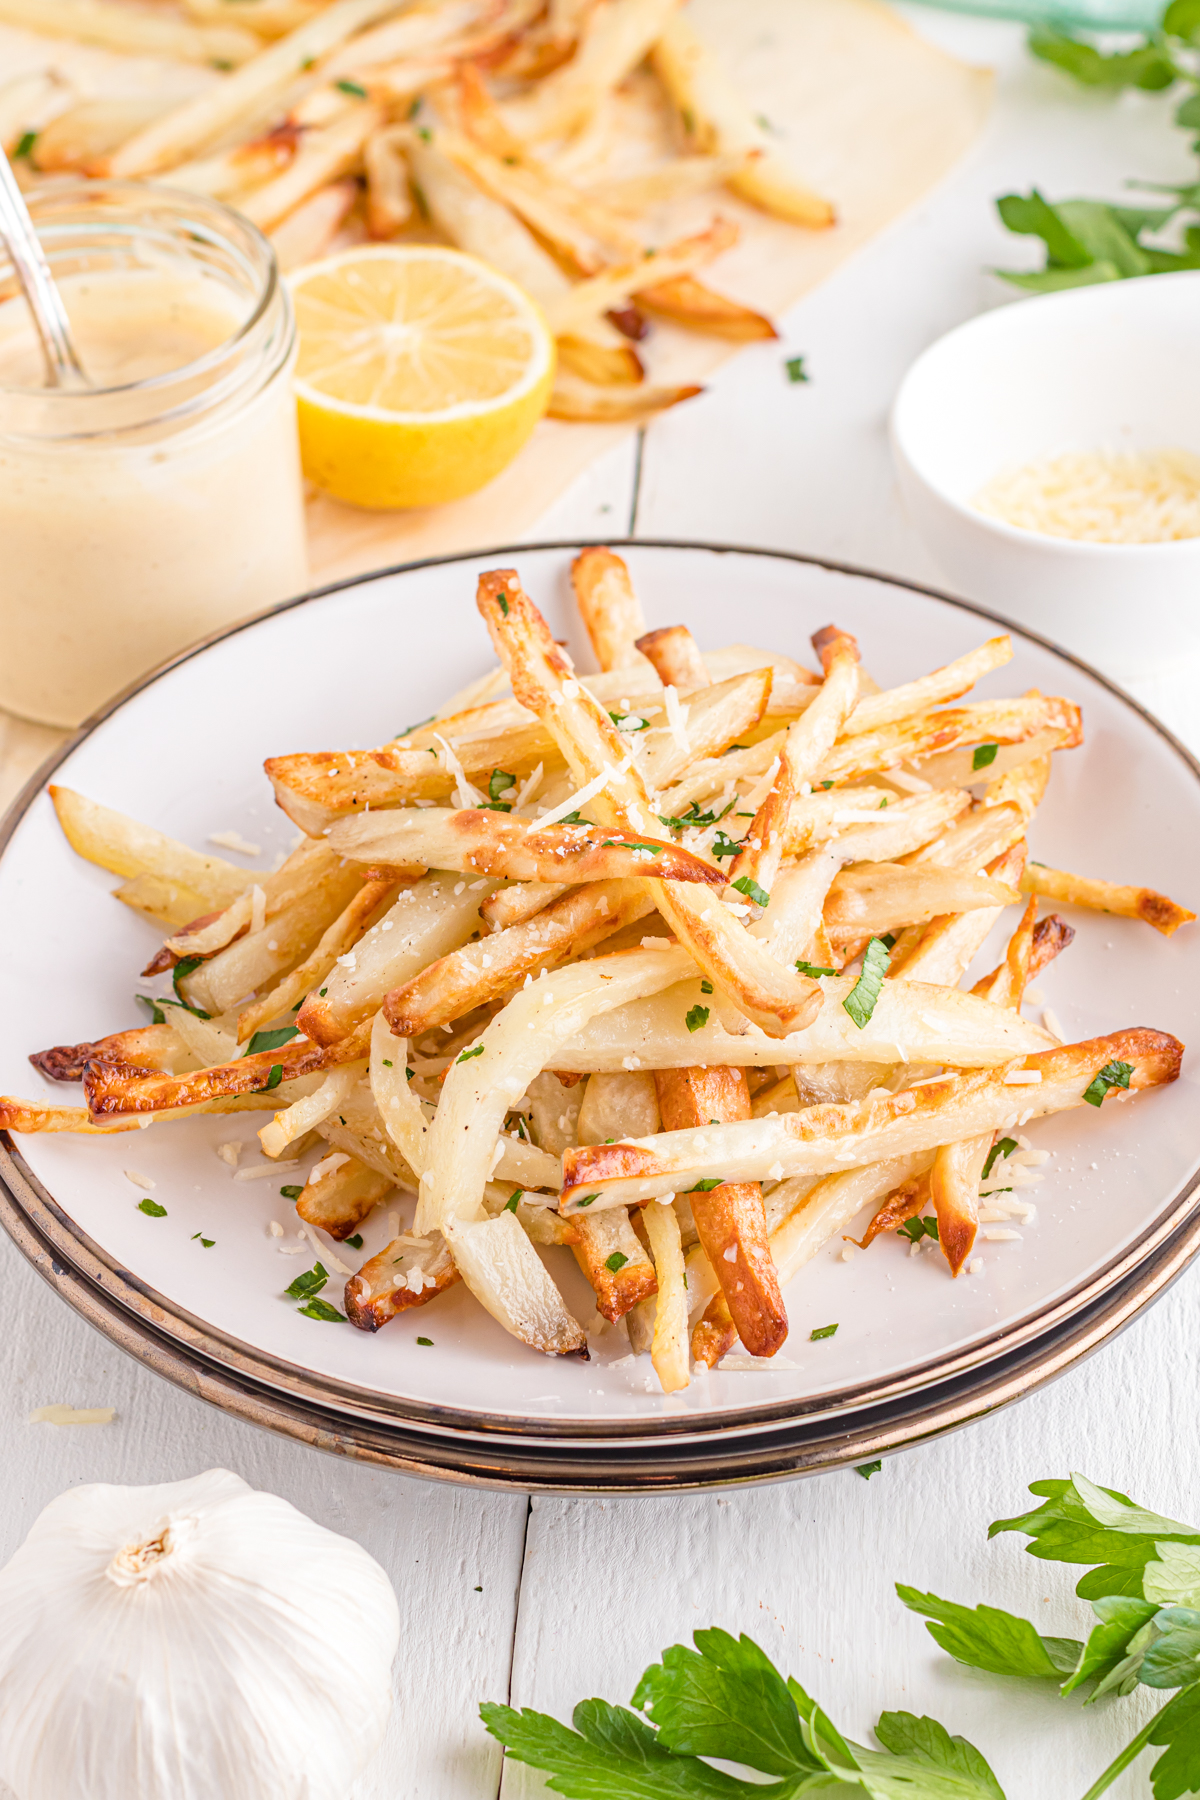 Truffle fries on table with garlic and parsley.